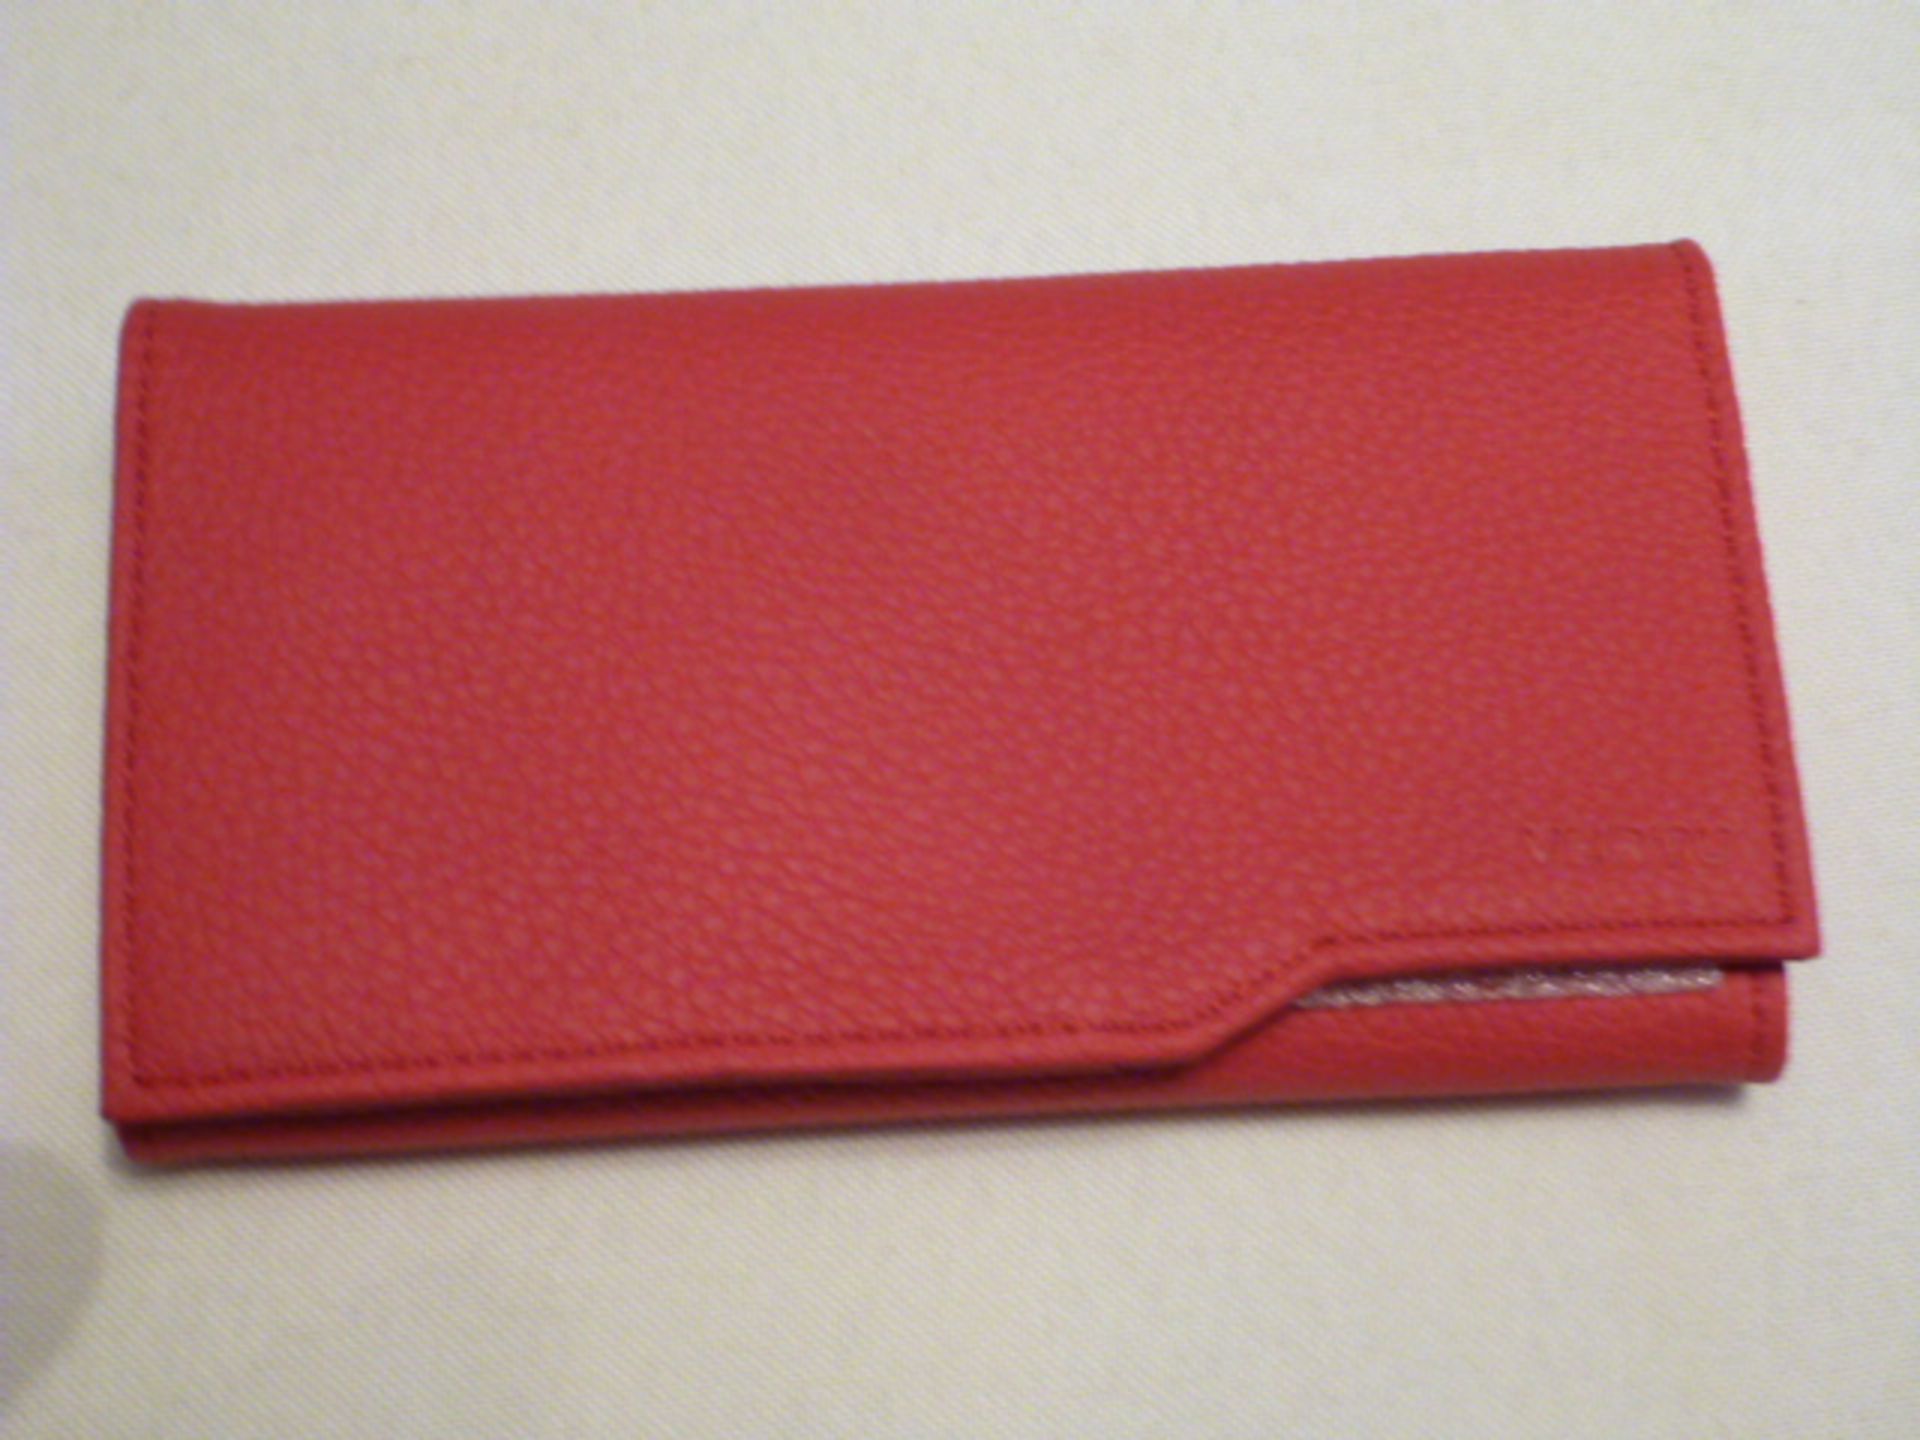 Vertu Aster Blush Leather Purse Style Pouch. RRP £520. New/Boxed